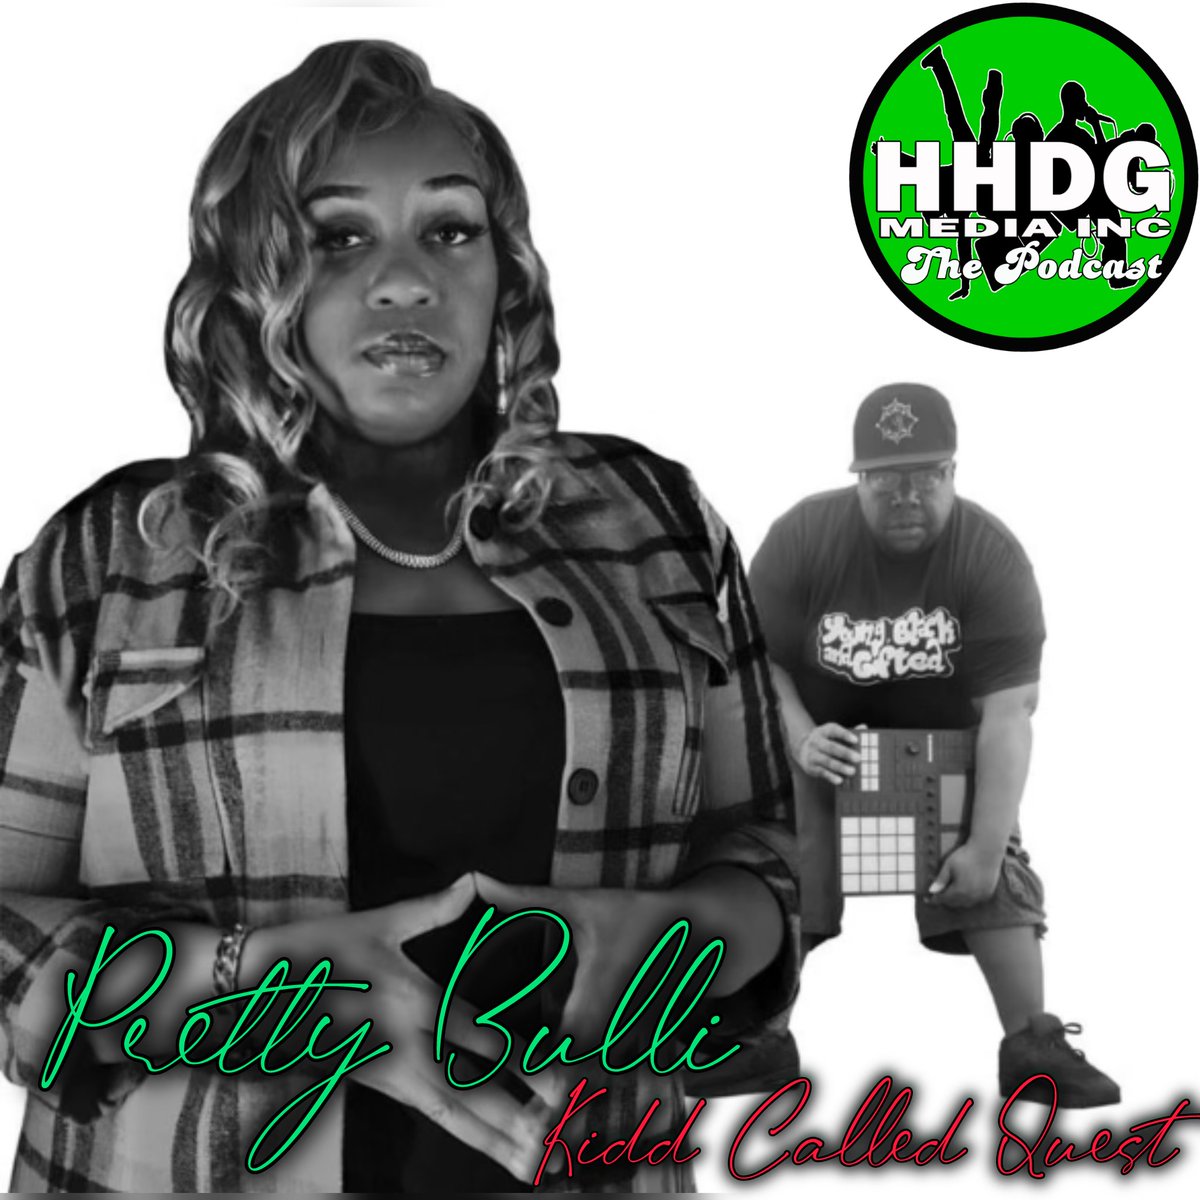 TONIGHT AT 9PM EST ON @HHDGMediaInc THE PODCAST OUR GUEST IS @PrettyBulli & @KiddCalledQuest WATCH & COMMENT LIVE VIA YOUTUBE youtube.com/live/2MbCUqYyb… #PRETTYBULLI #KIDDCALLEDQUEST #THENANDNOW #BUFFALO #ROCHESTER #INTERVIEW #PODCAST #PRODUCER #EMCEE #XDECADE #HHDGMEDIAINC